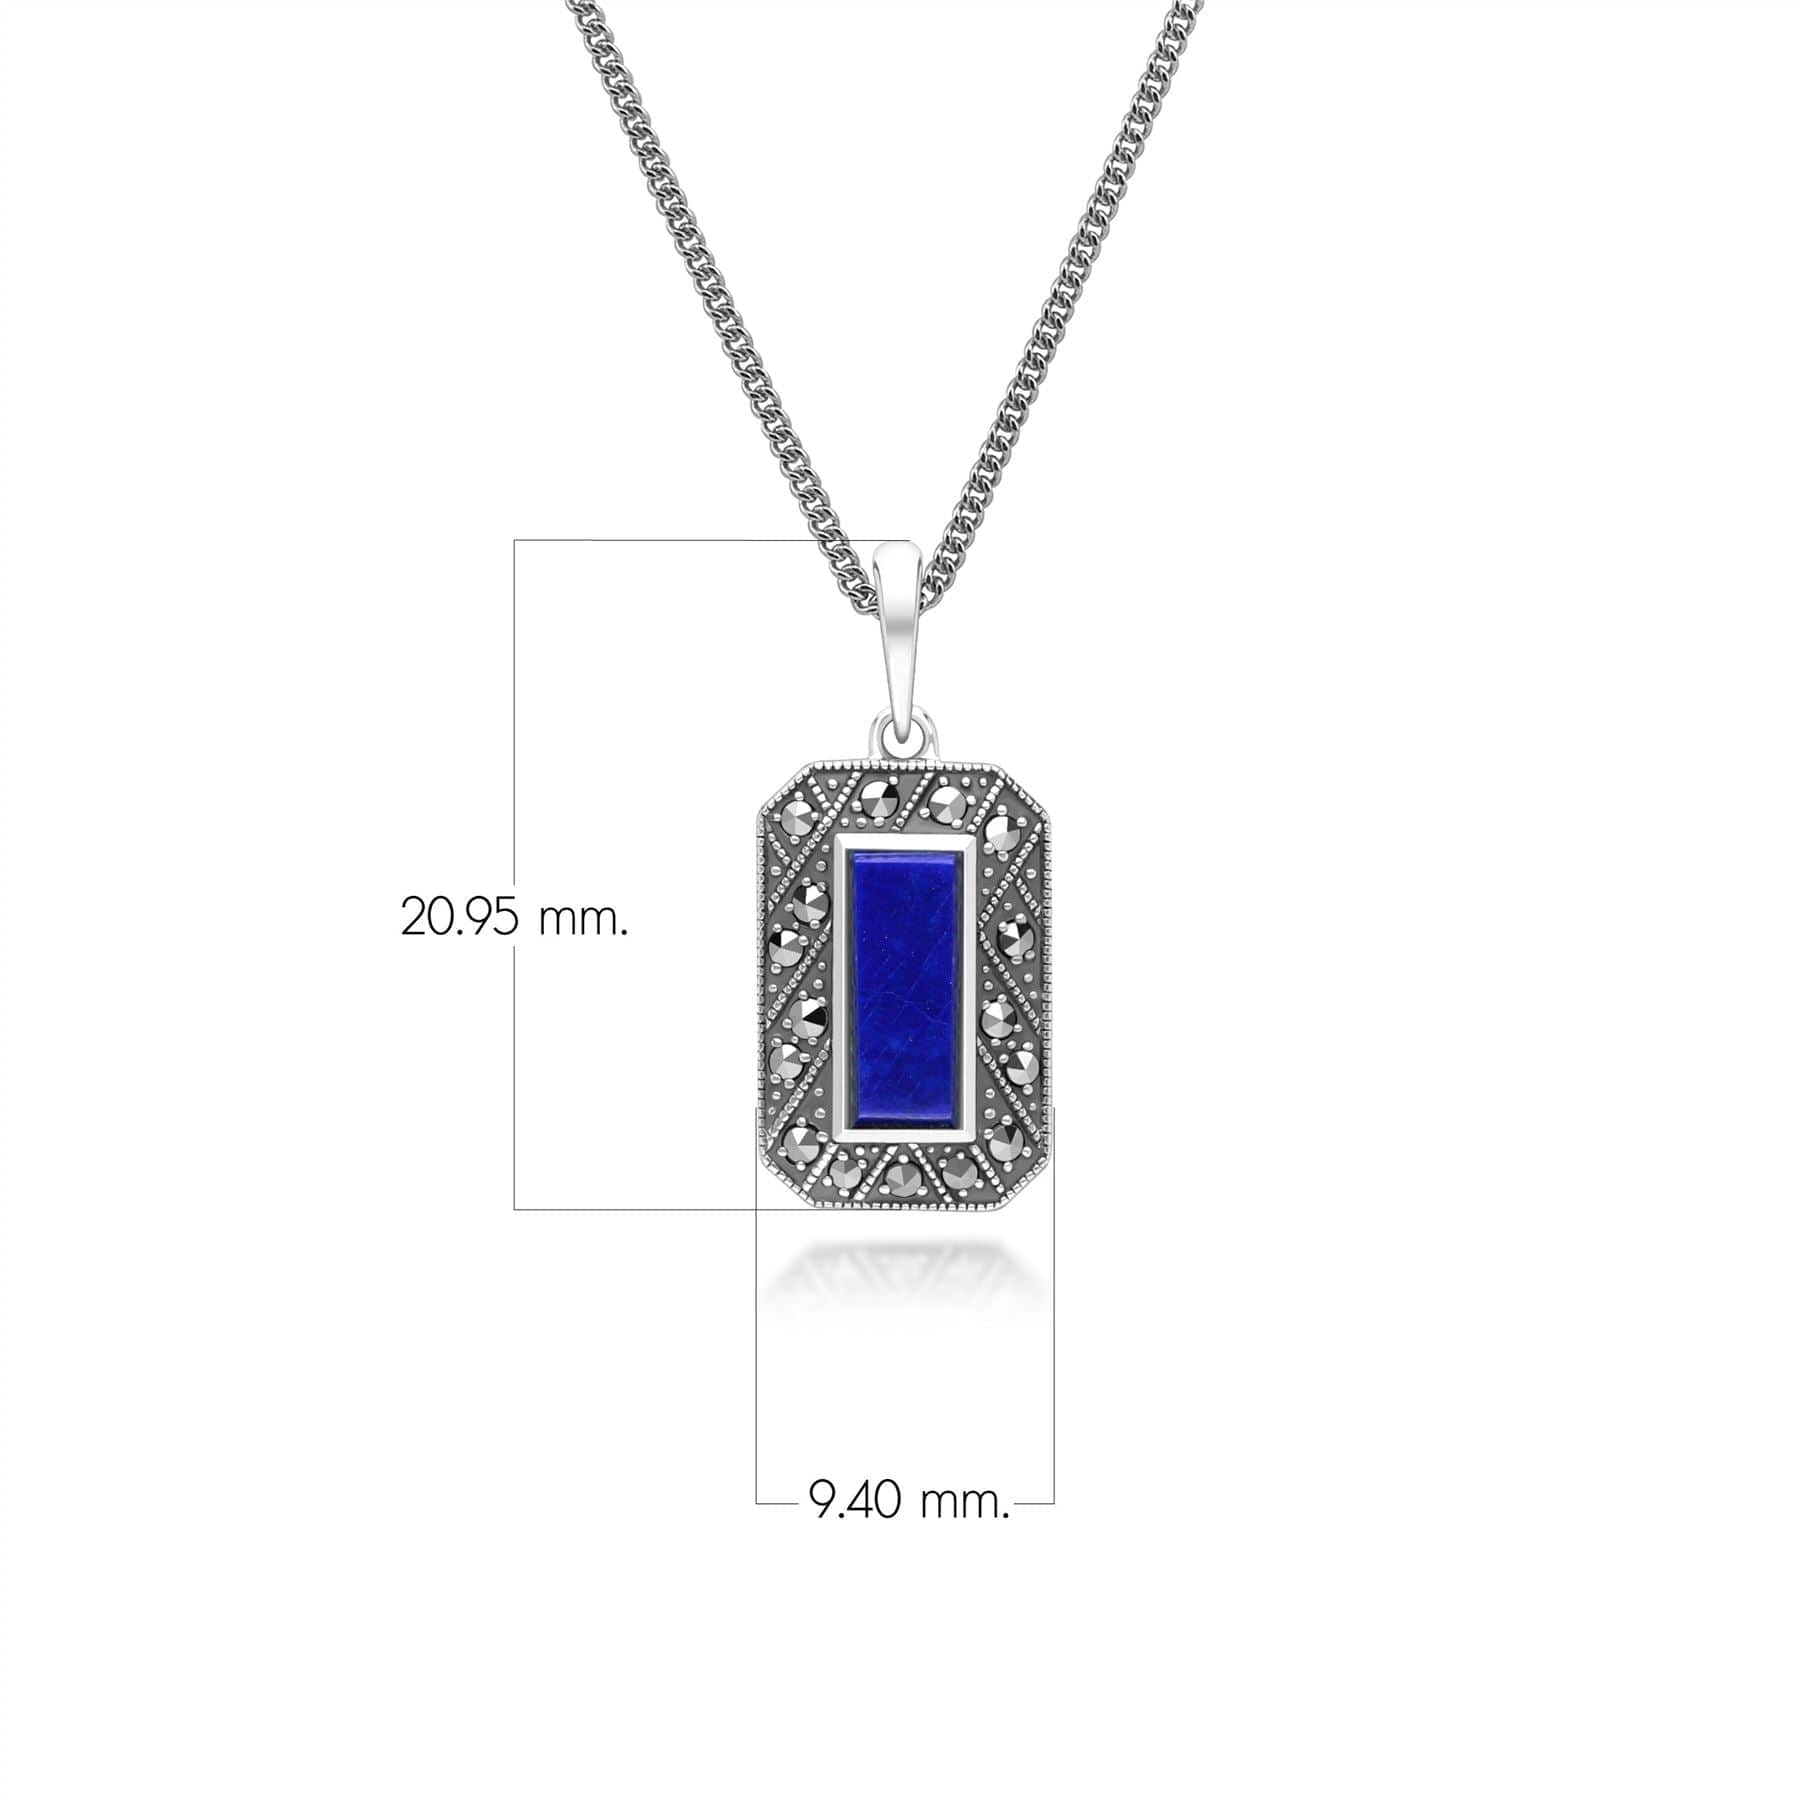 Art Deco Style Rectangle Lapis Lazuli and Marcasite Pendant Necklace in Sterling Silver 214P334003925 Dimensions